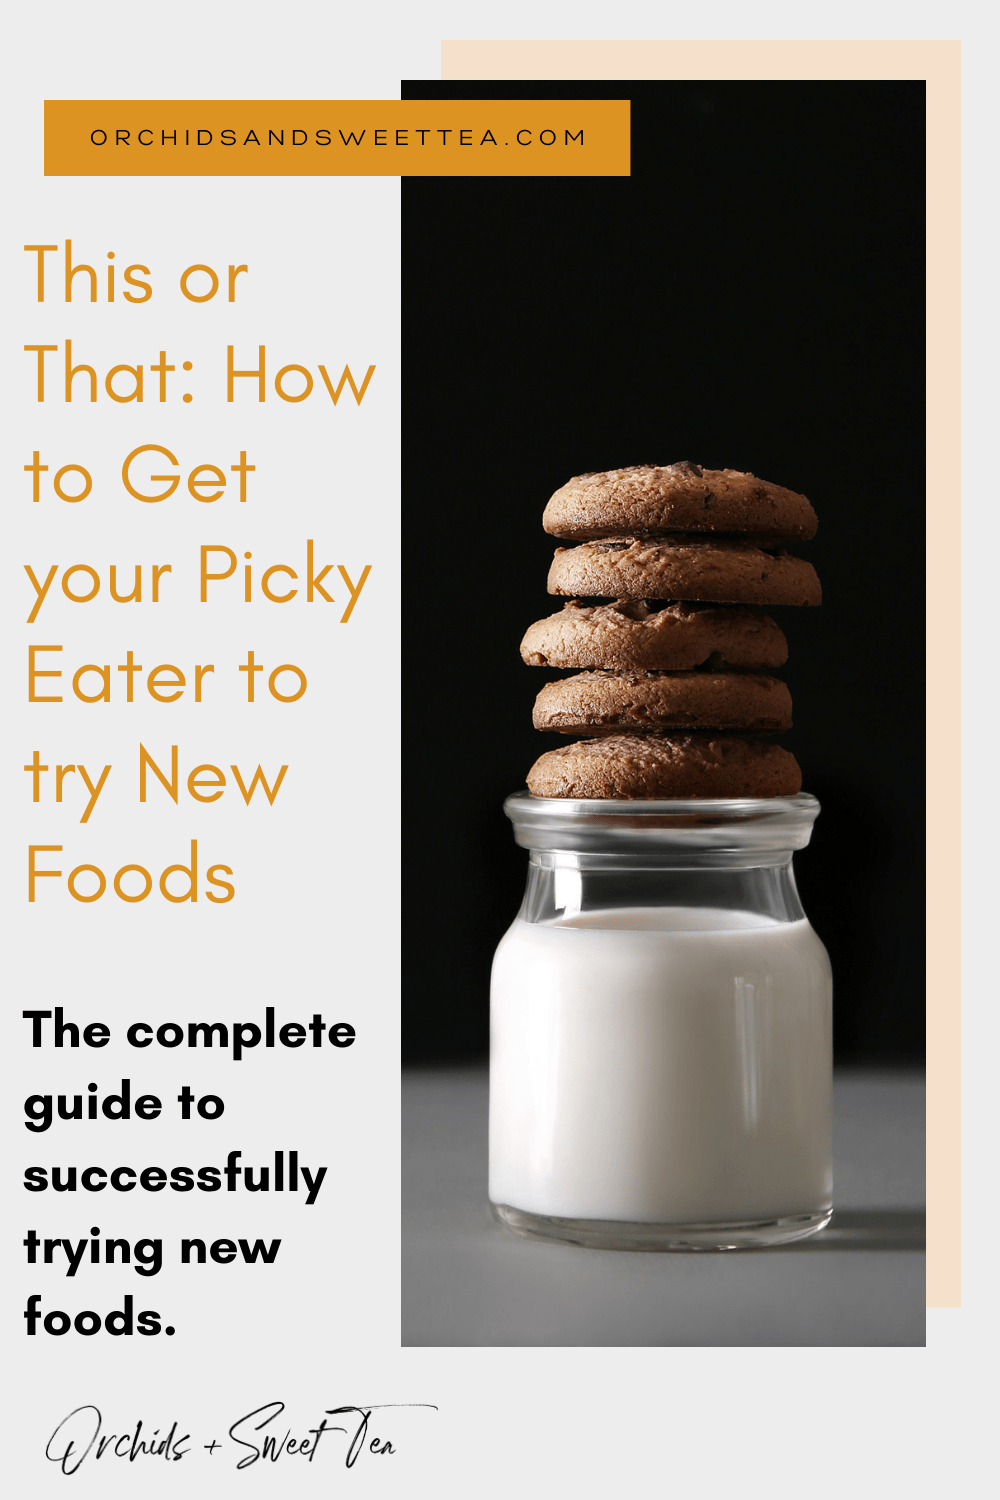 This or That: How to Get your Picky Eater to try New Foods